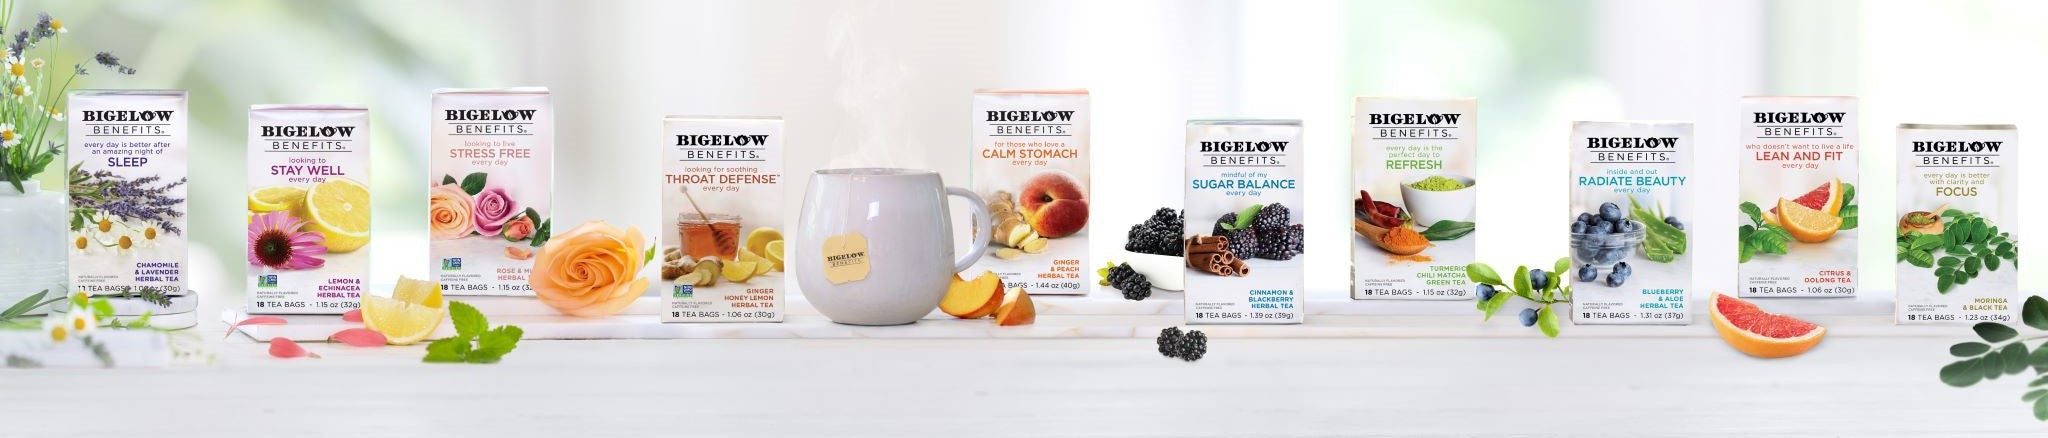 Bigelow Benefits Teas - the full product line